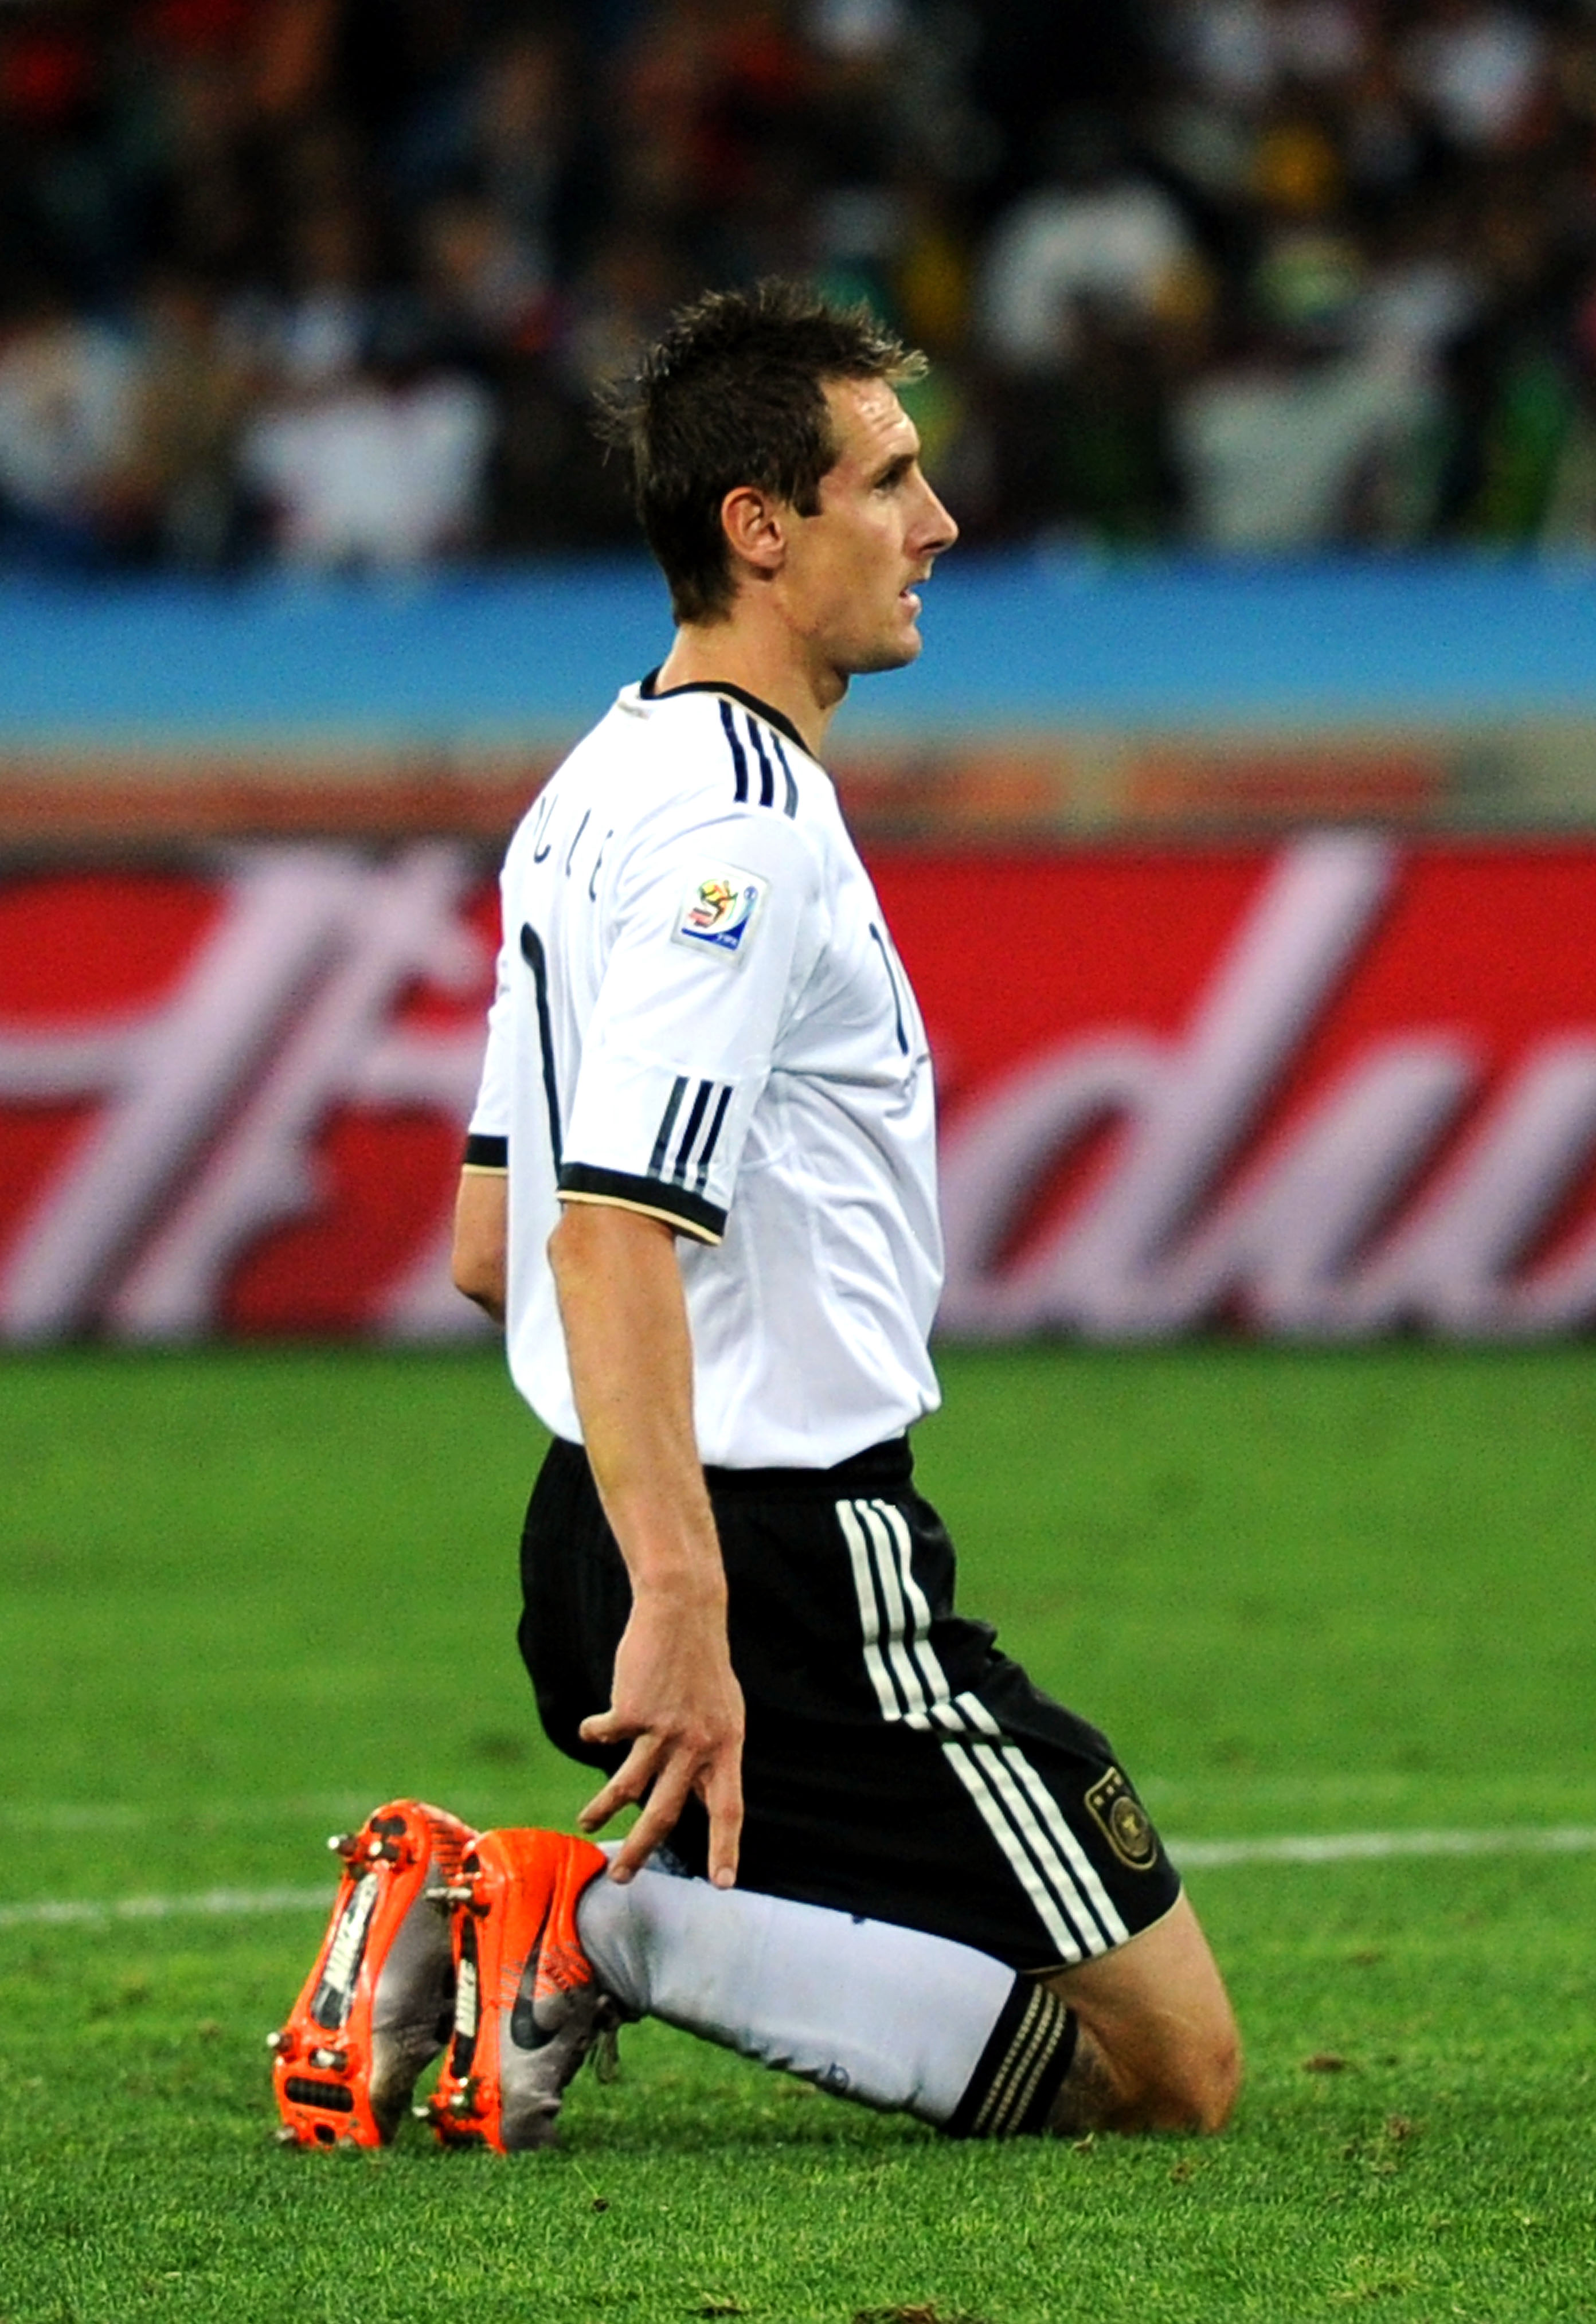 DURBAN, SOUTH AFRICA - JULY 07:  Miroslav Klose of Germany kneels on the pitch after missing a goal scoring chance during the 2010 FIFA World Cup South Africa Semi Final match between Germany and Spain at Durban Stadium on July 7, 2010 in Durban, South Af